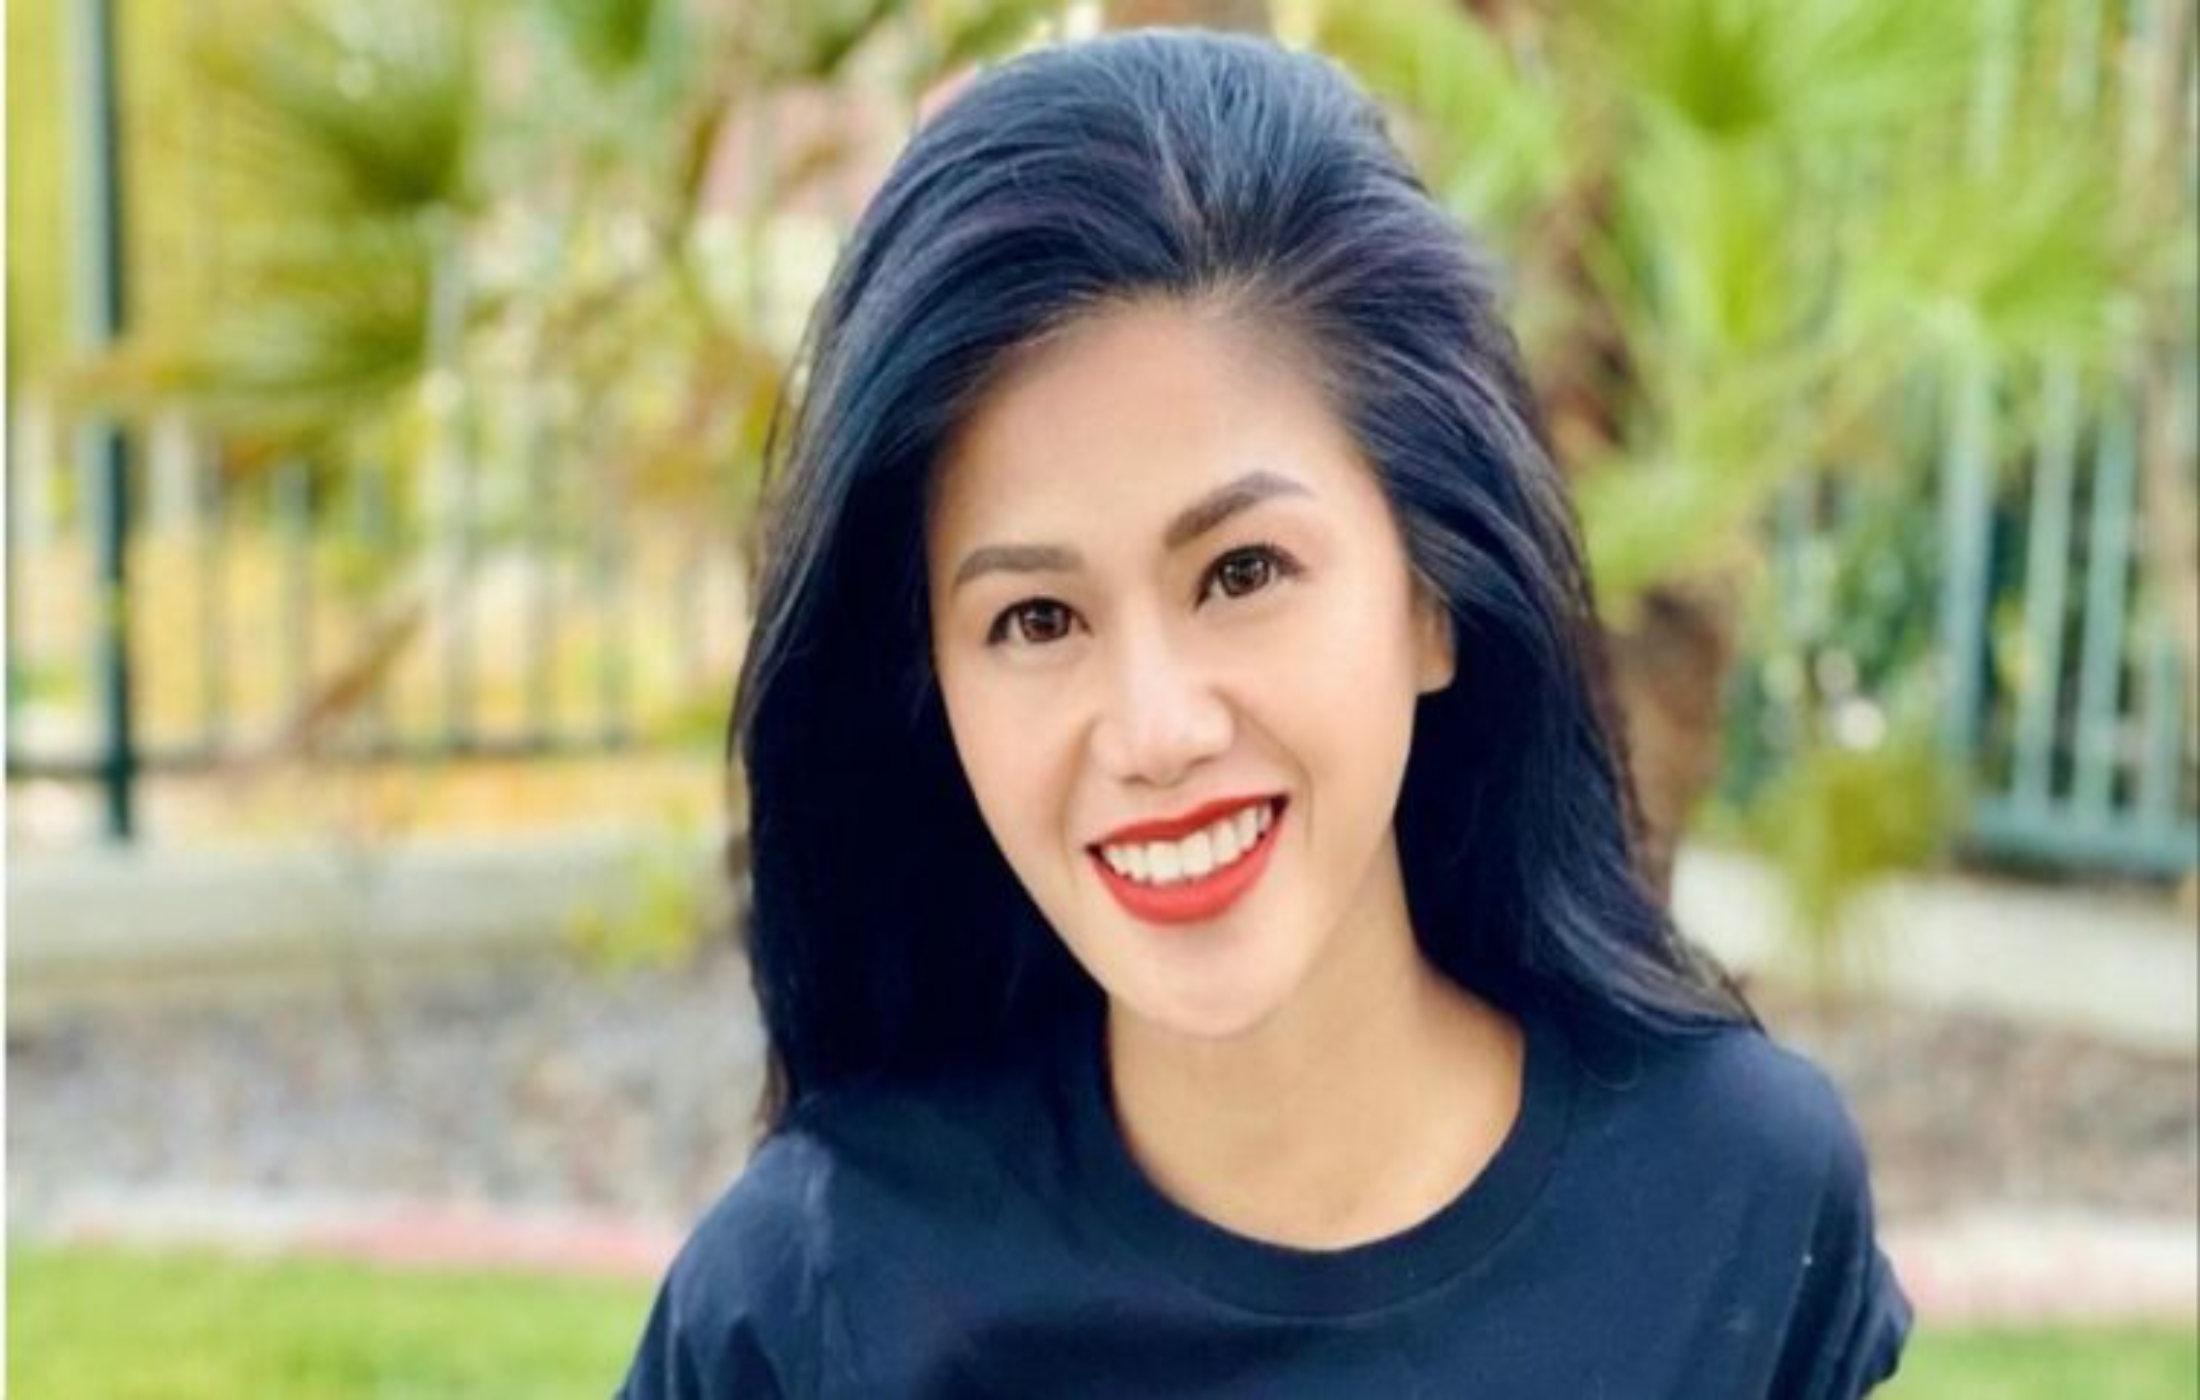 Vy Qwaint age, net worth, husband, family, biography & latest updates